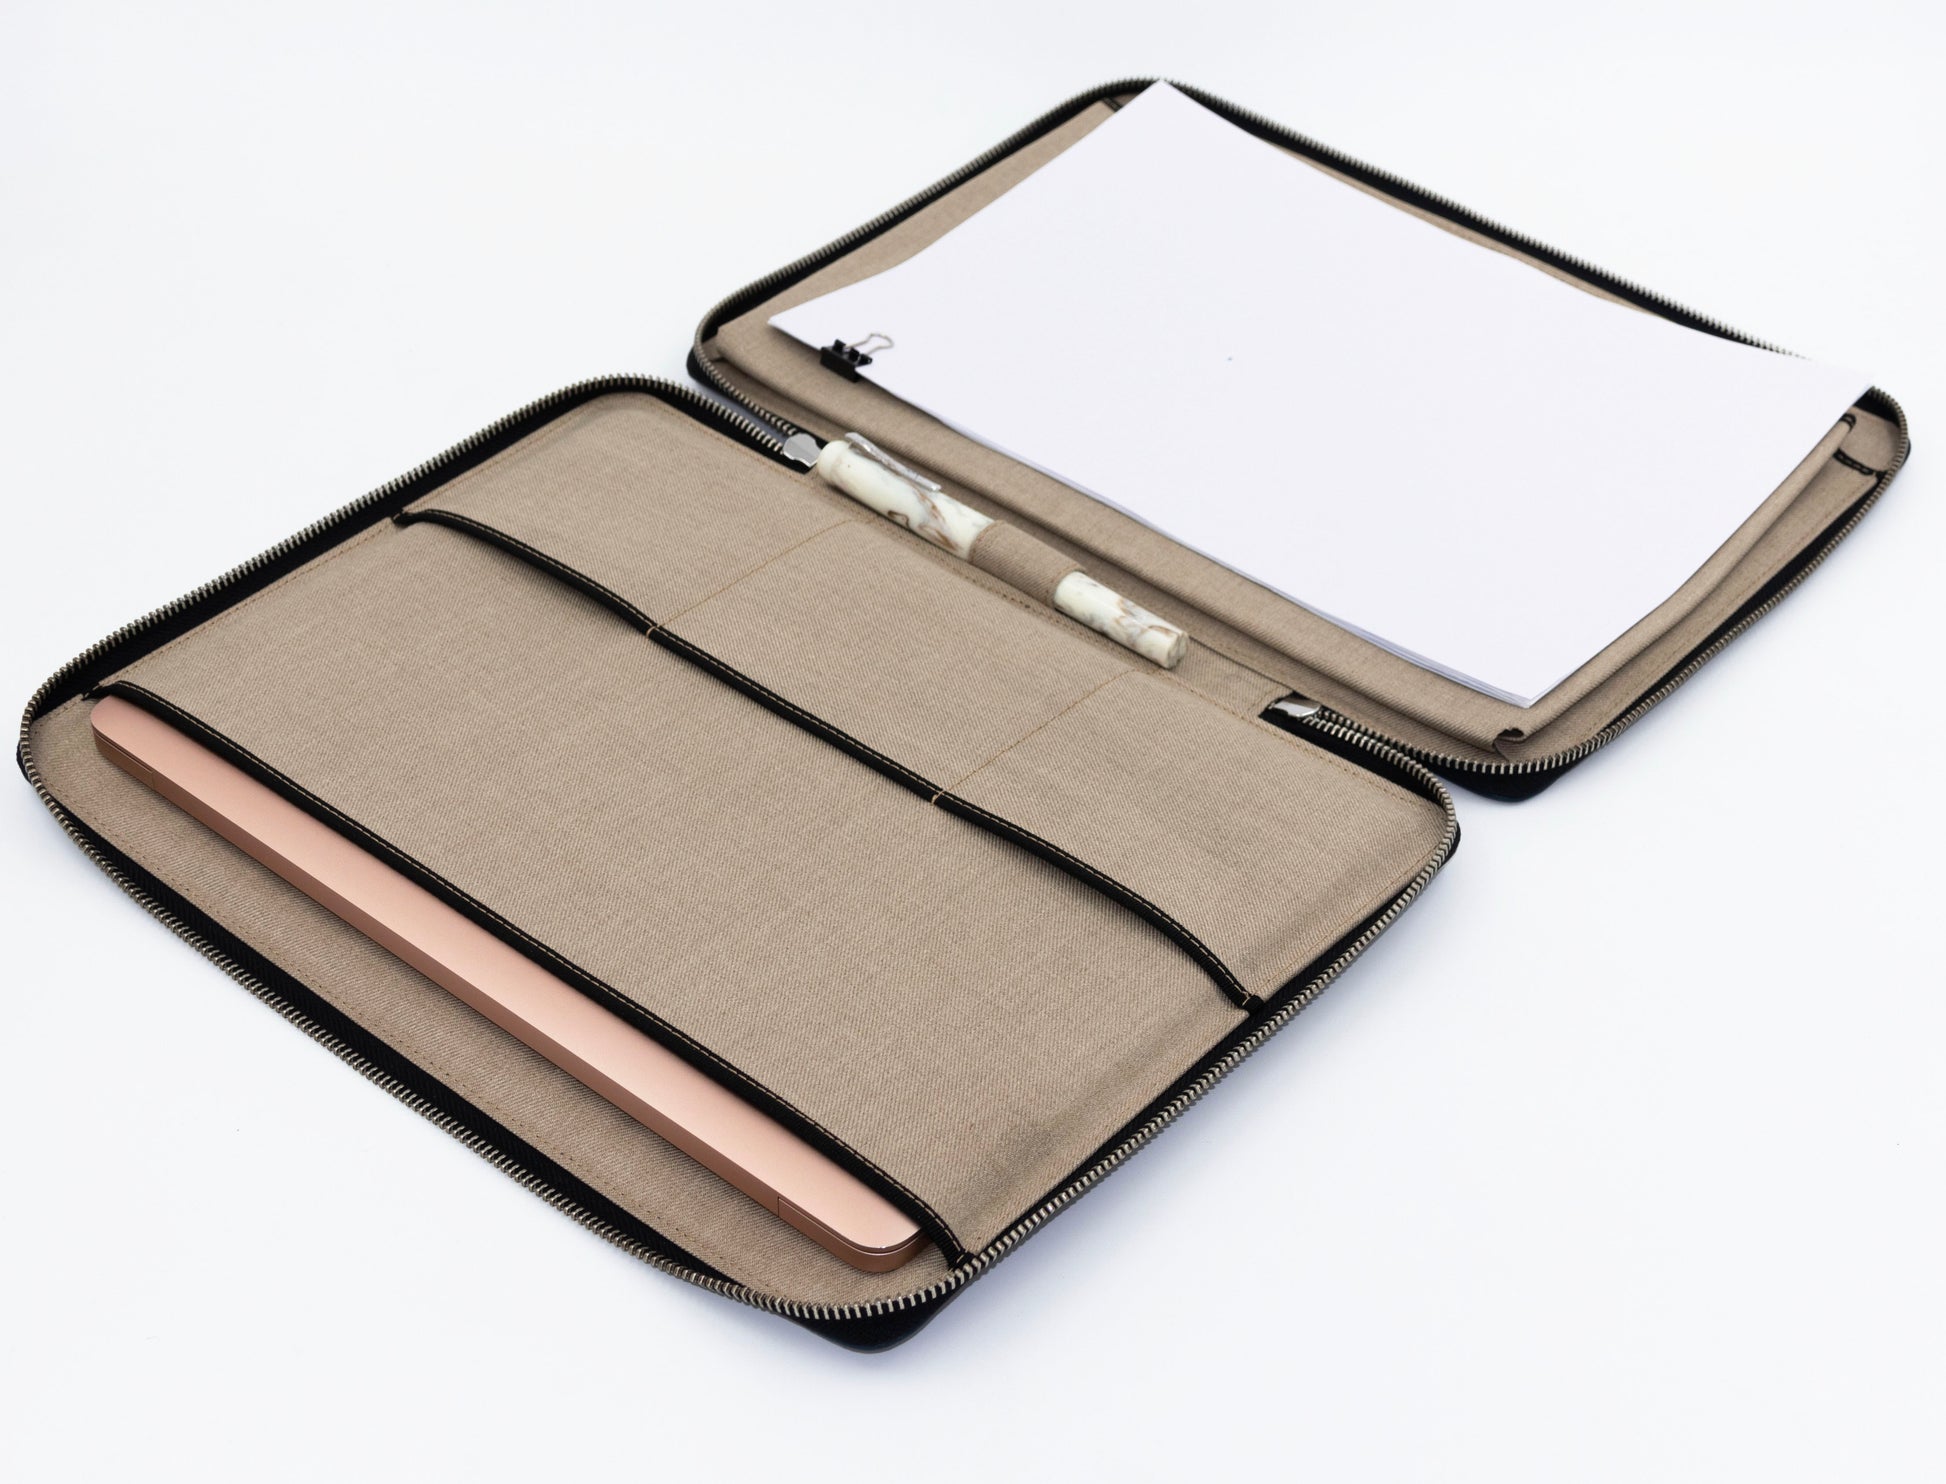 The HP Spectre Cas unzips to reveal an interior that stores documents and writing instruments. Lays flat on the table and a writing pad can be placed on it